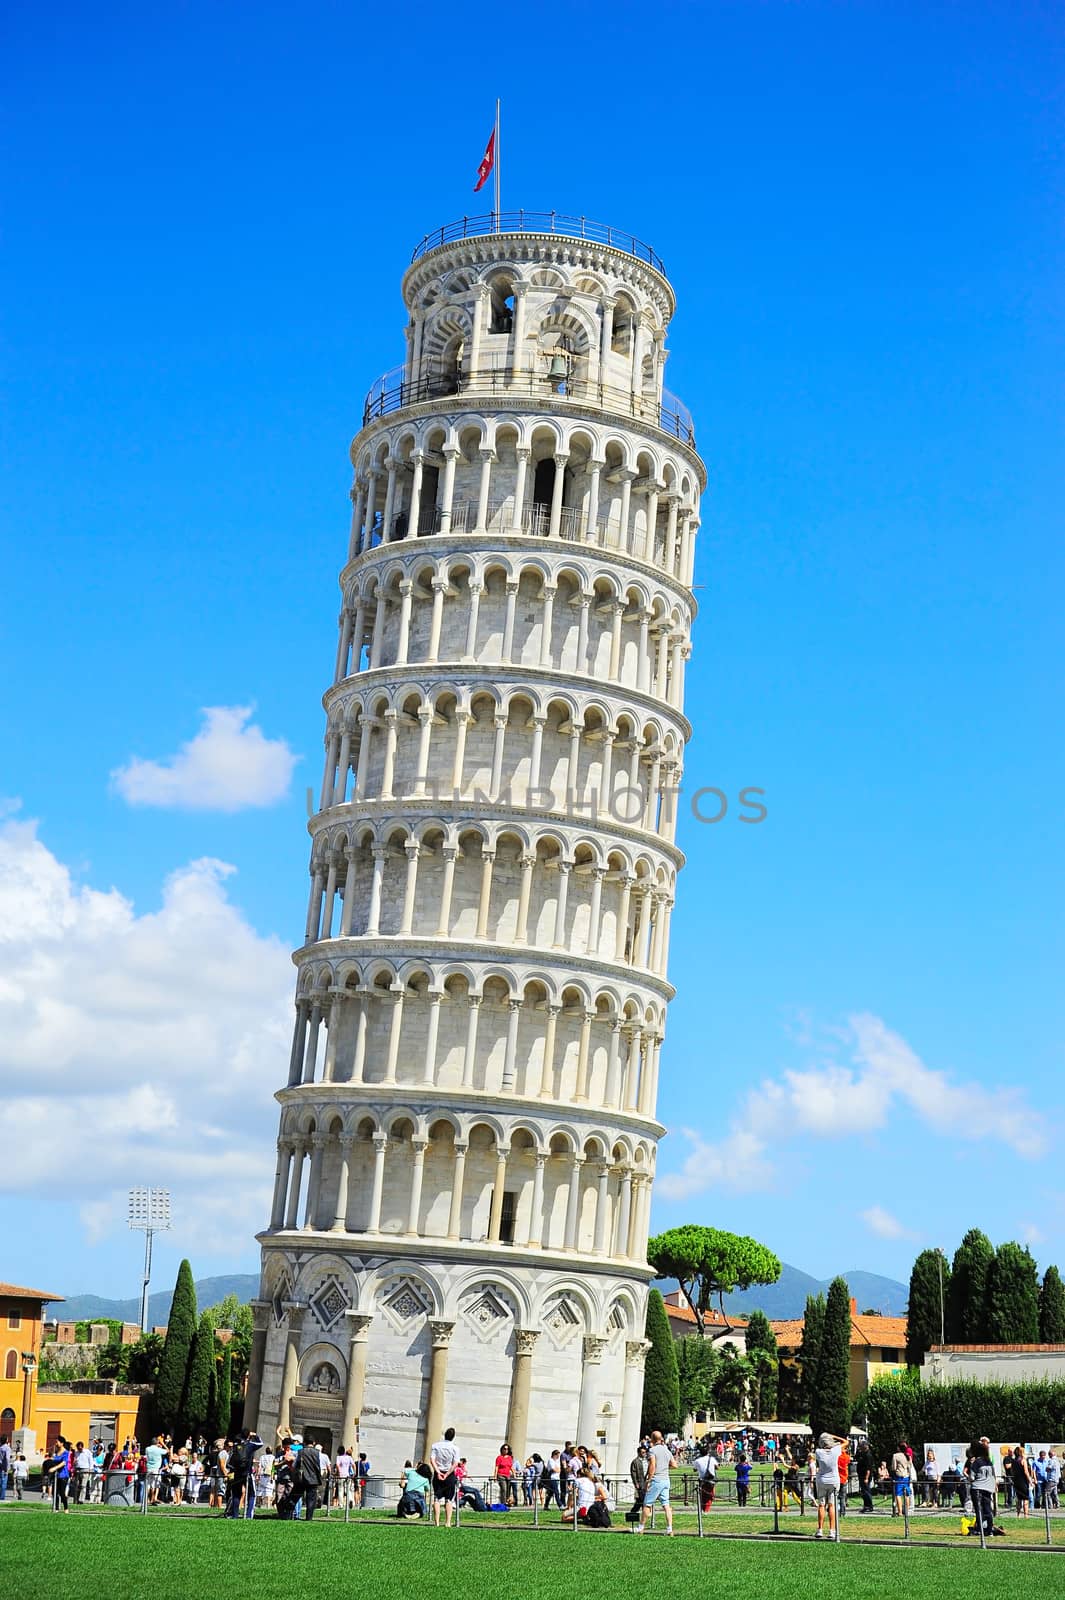 PISA, ITALY - SEPTEMBER 11, 2013: Tourists on Square of Miracles visiting Leaning Tower in Pisa, Italy. Leaning Tower of Pisa is campanile and is one of the most famous buildings in the world 